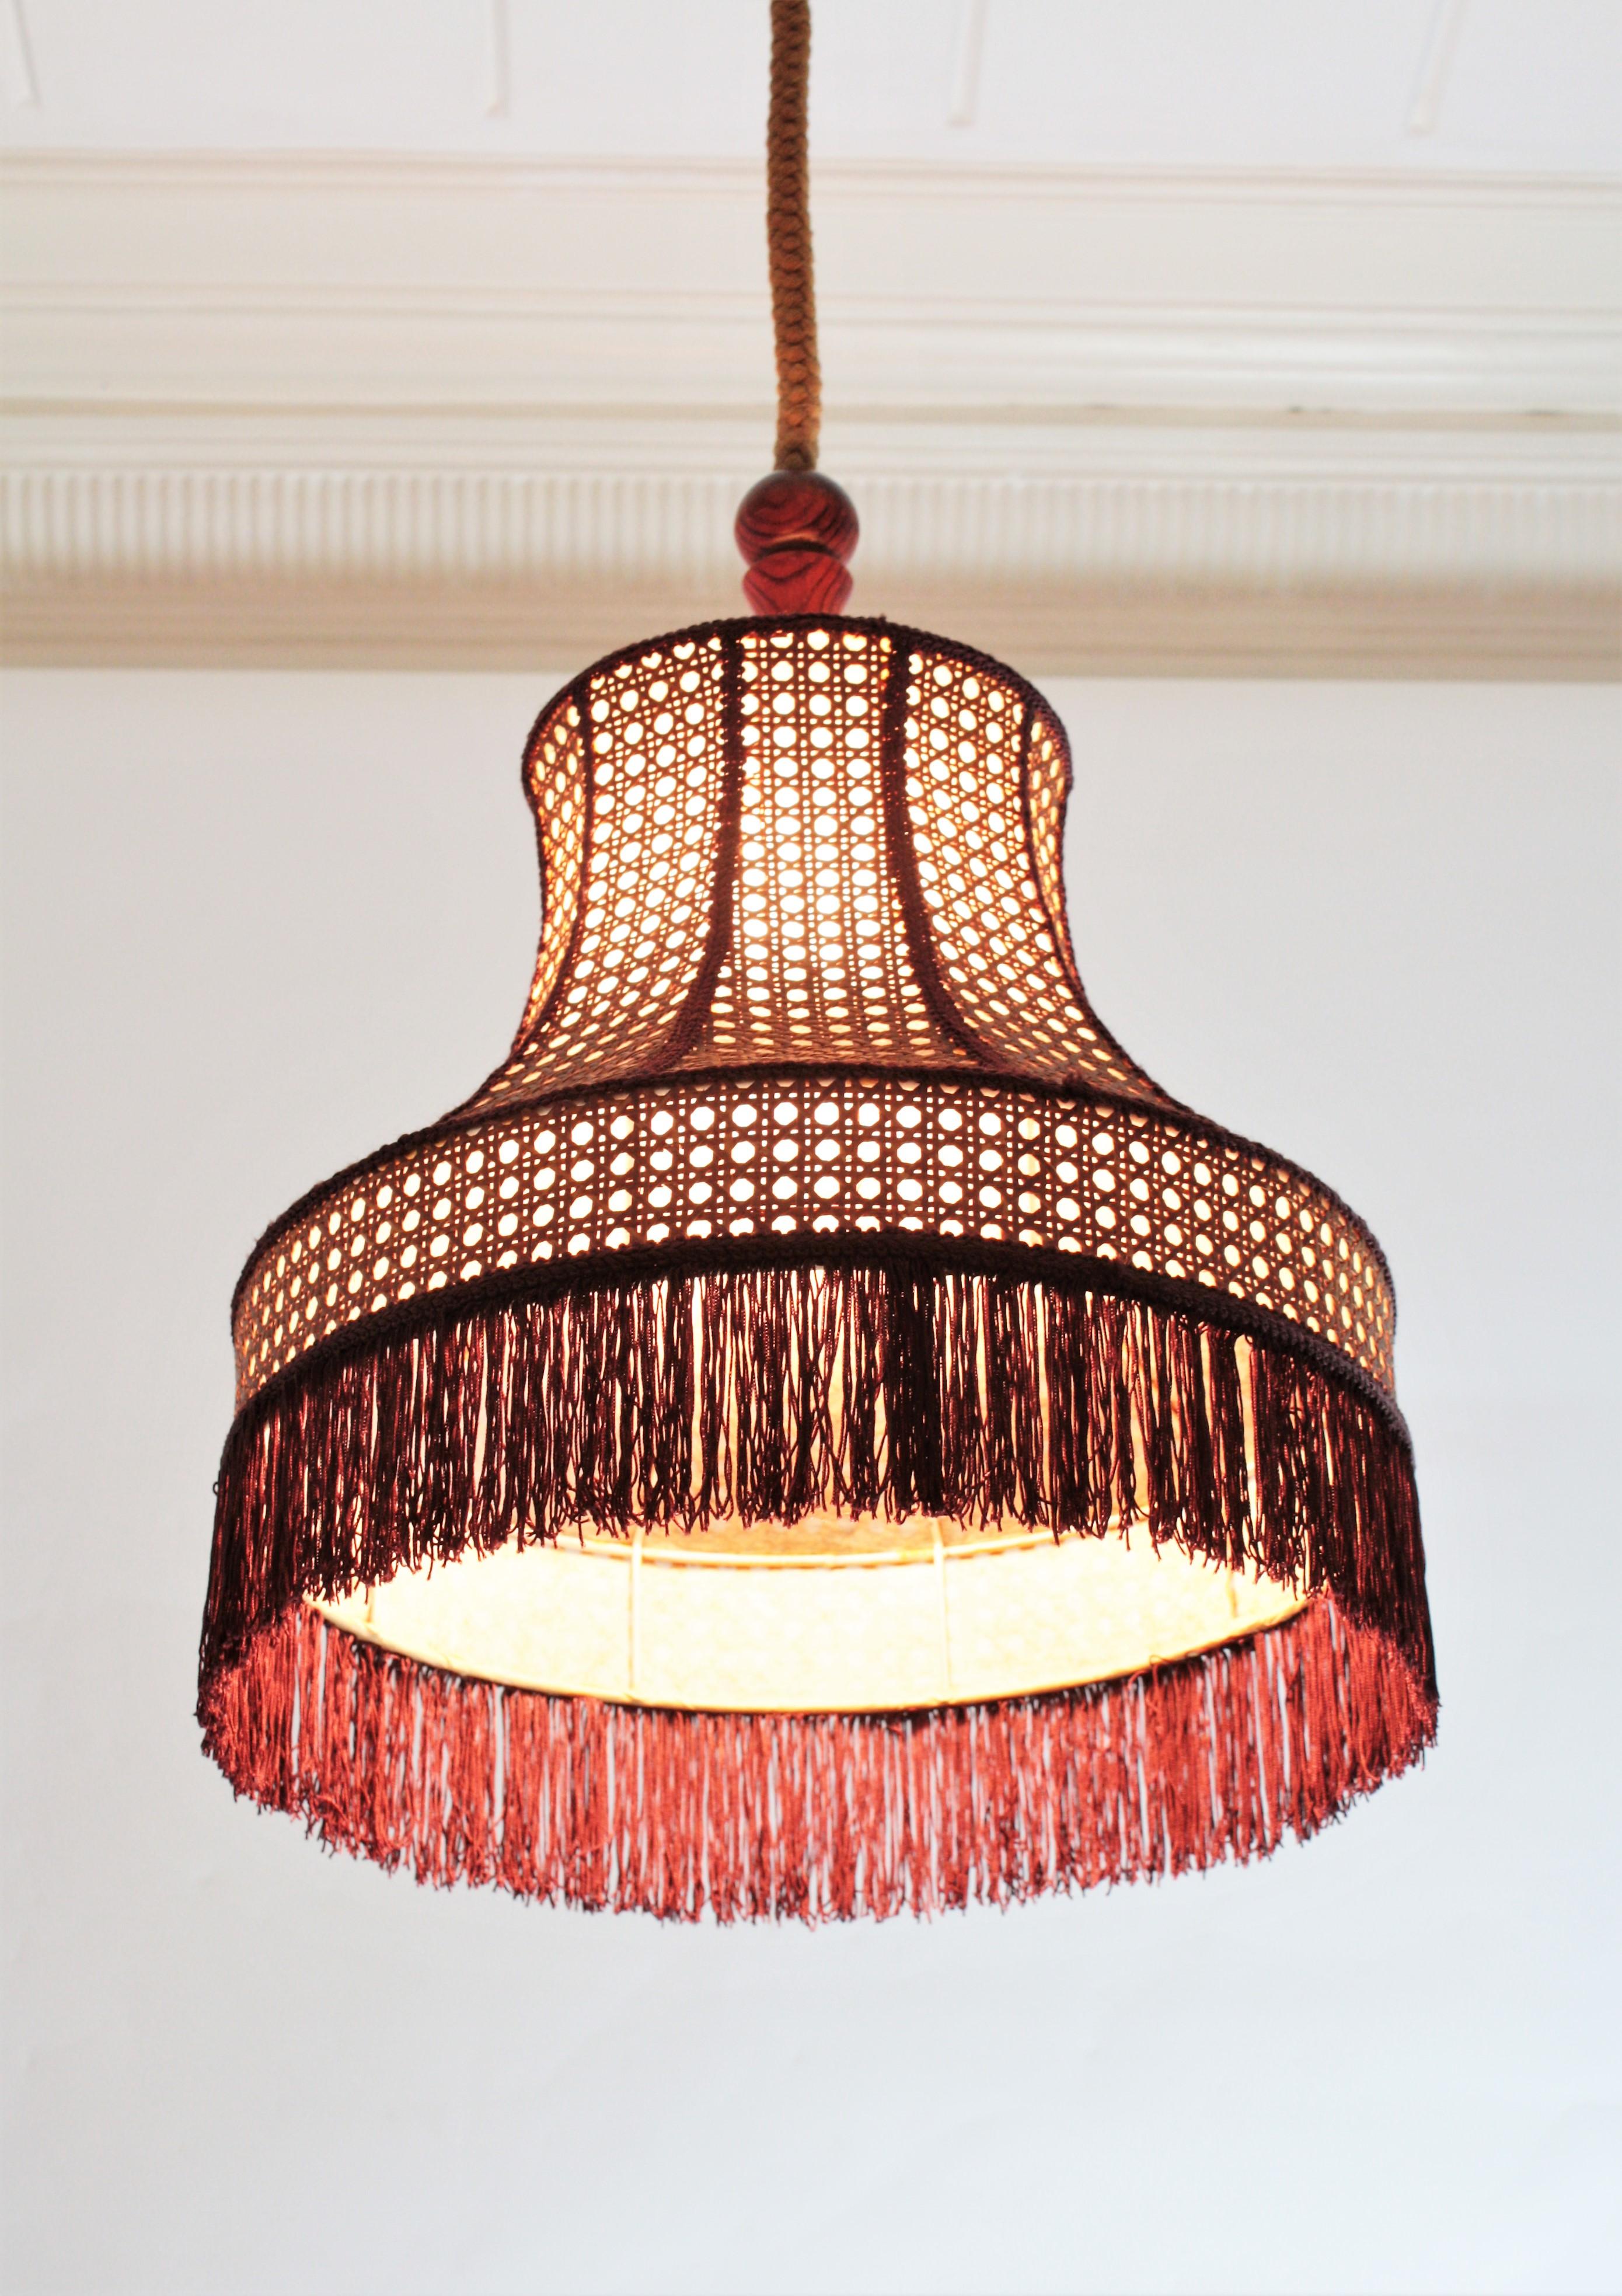 Rattan Wicker Pendant Hanging Lamp with Pagoda Shape and Fringed Bottom 1